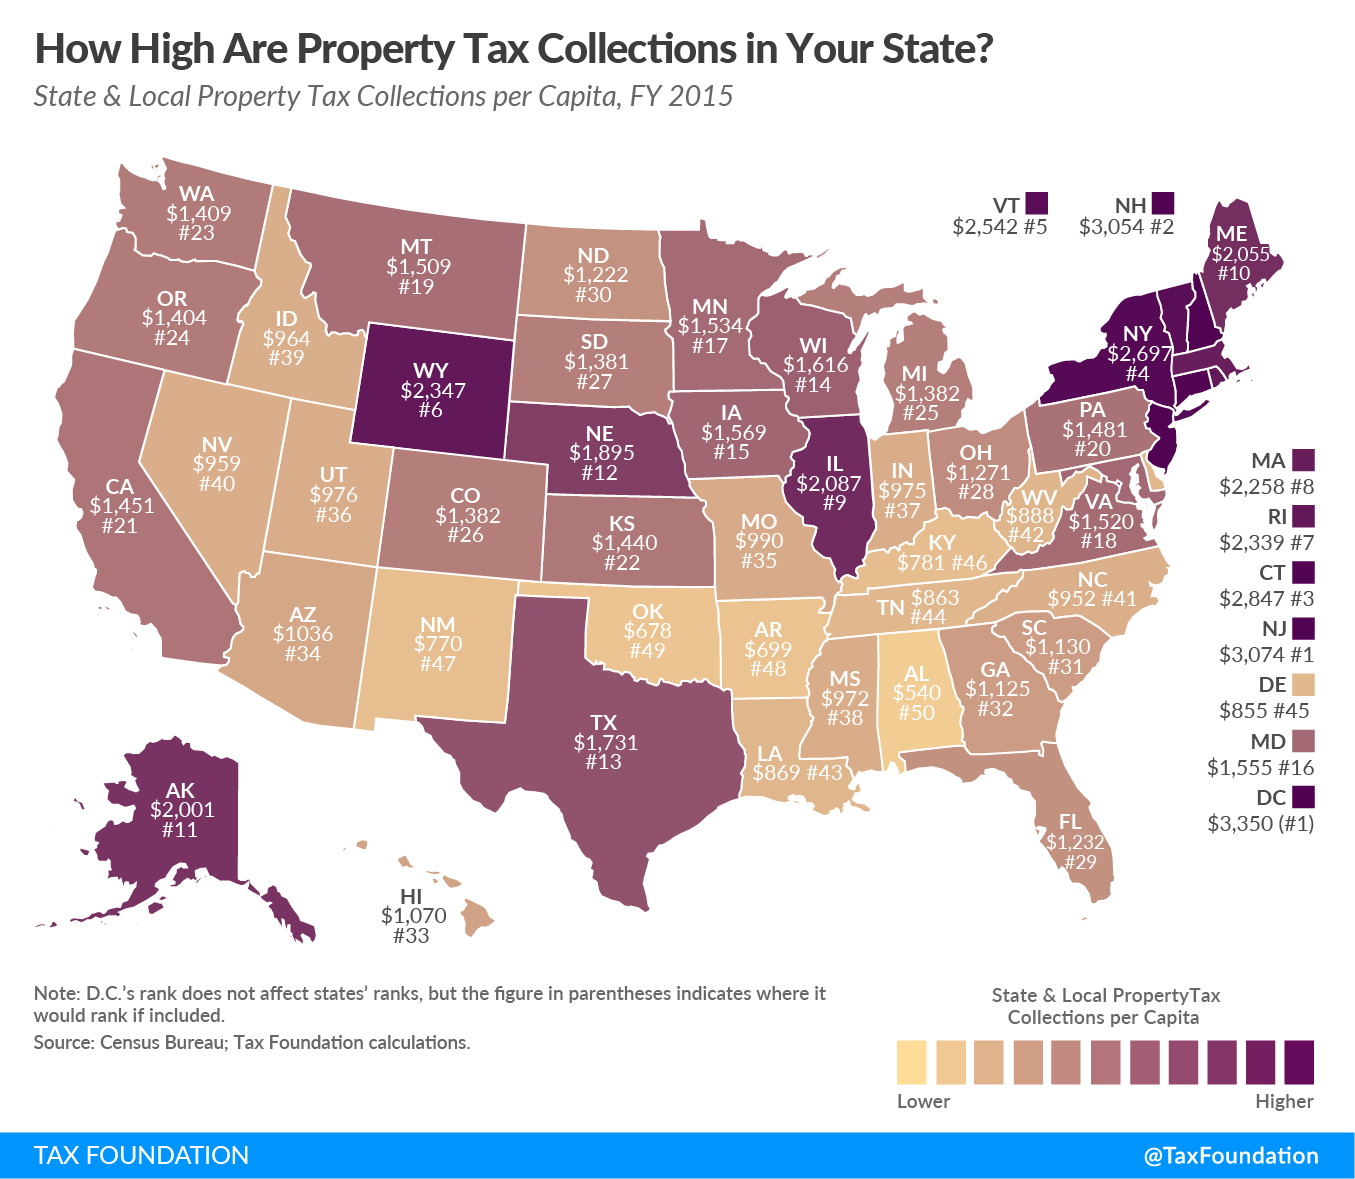 How high are property tax collections in your state?